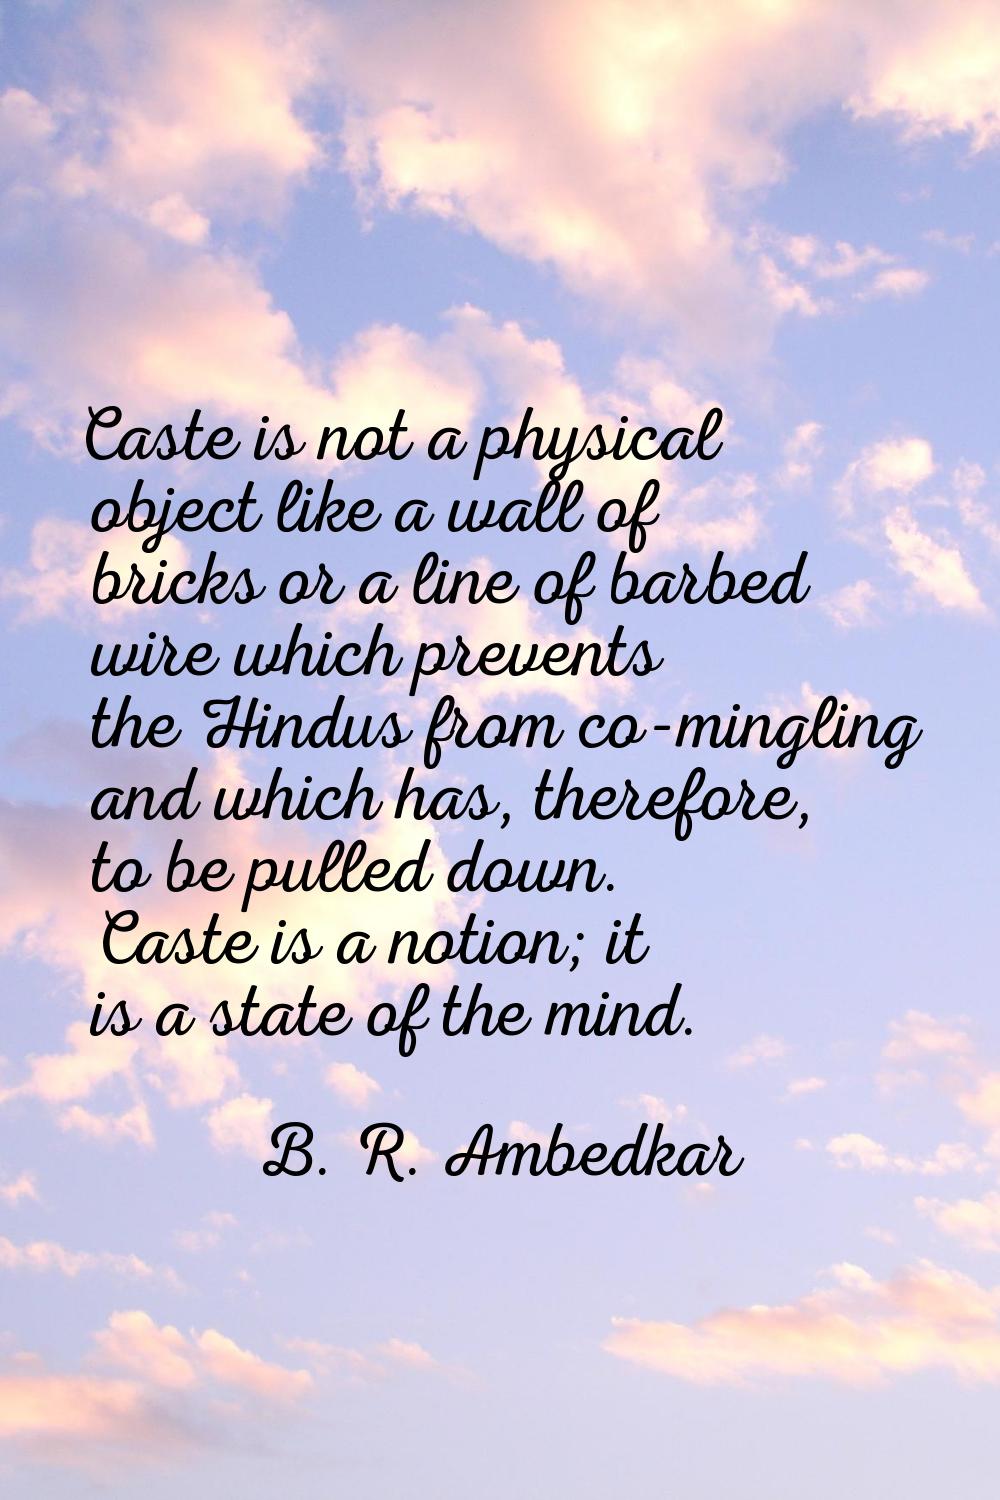 Caste is not a physical object like a wall of bricks or a line of barbed wire which prevents the Hi